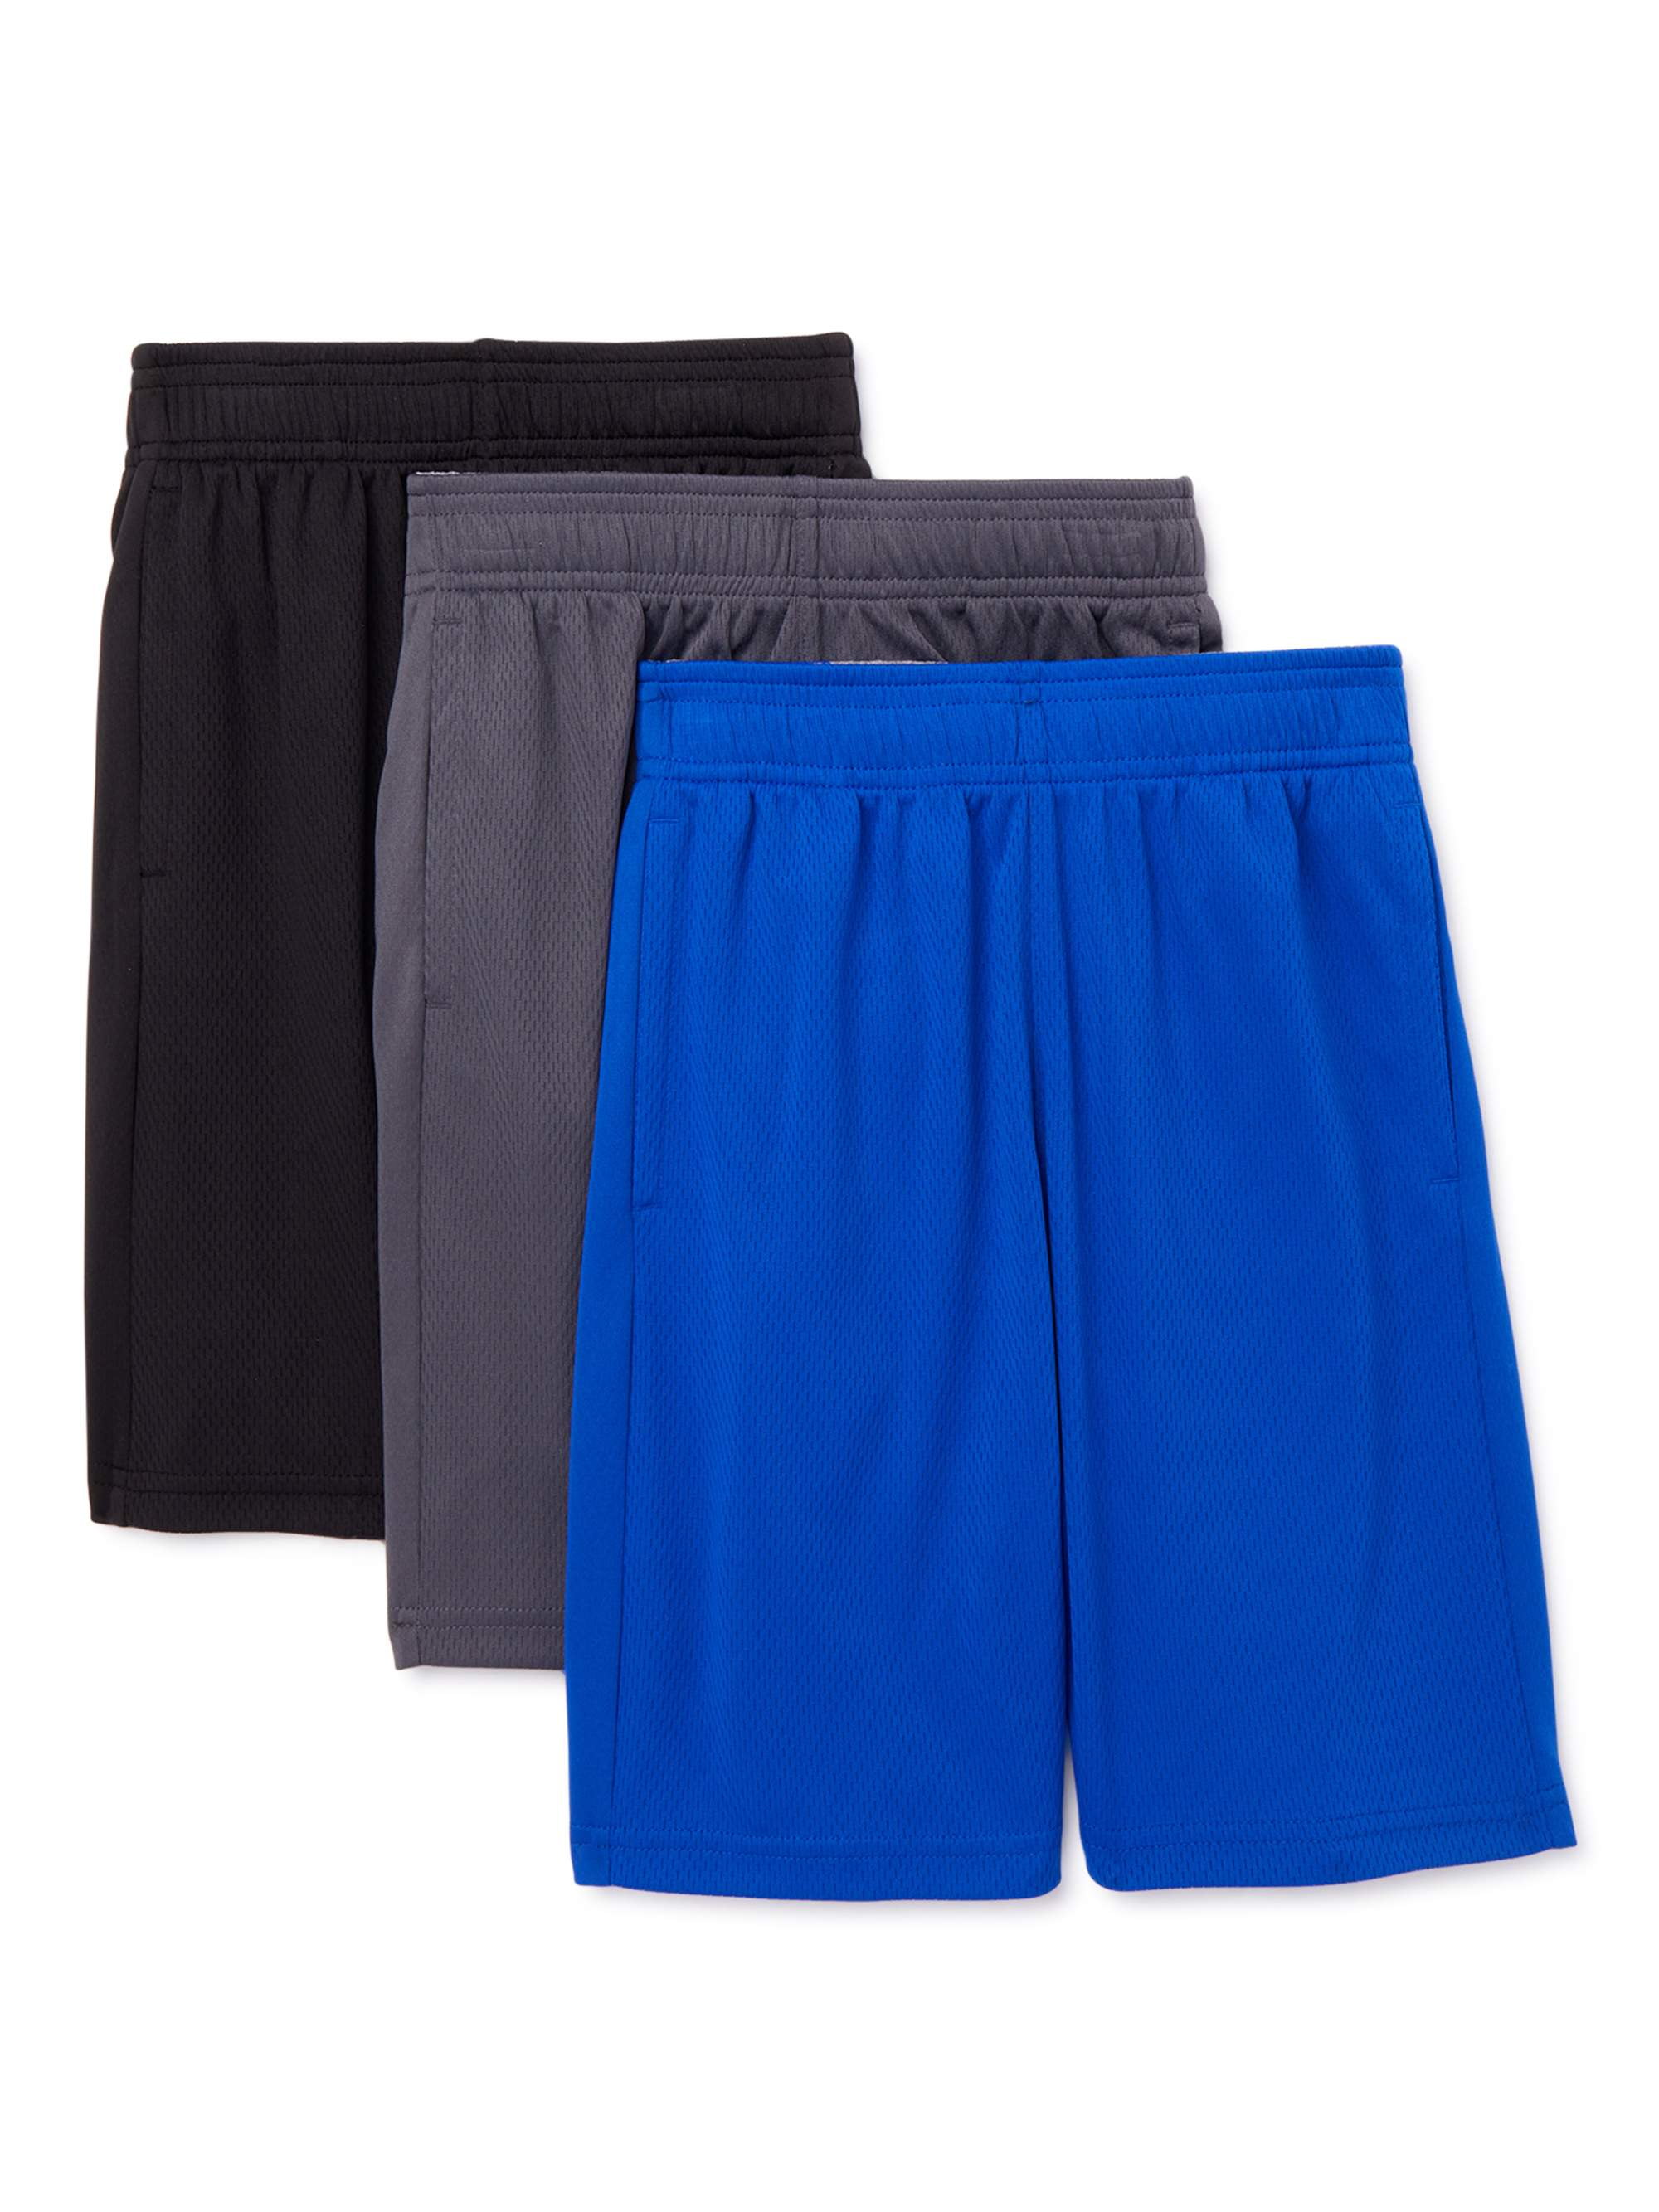 Athletic Works - Athletic Works Boys Core DriWorks 3-Pack Shorts, Sizes ...